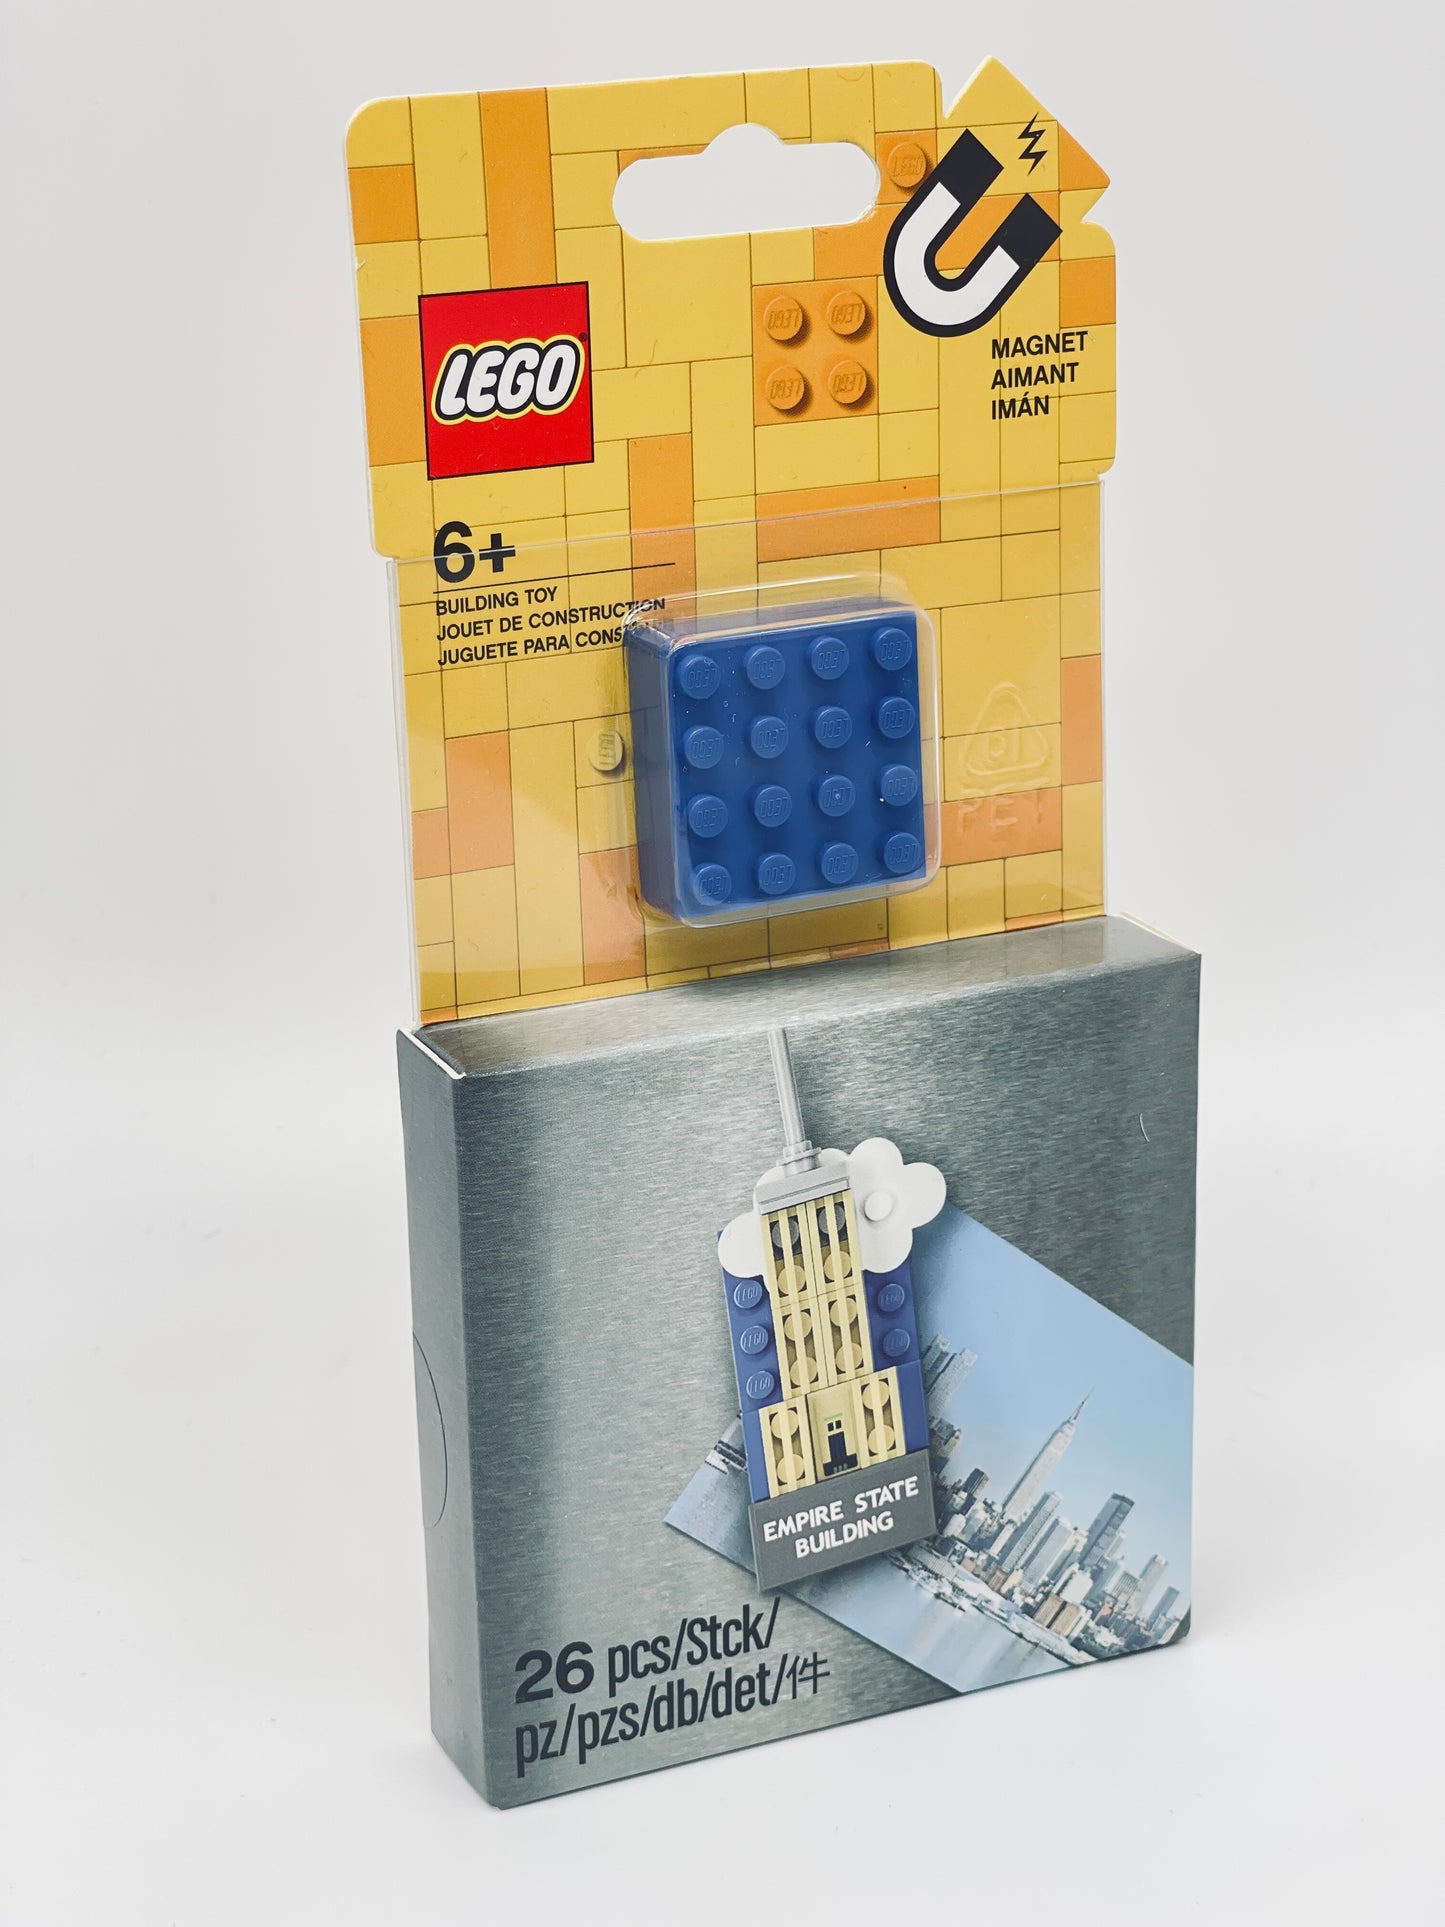 LEGO Magnet "Empire State Building" construction toy 26 parts 